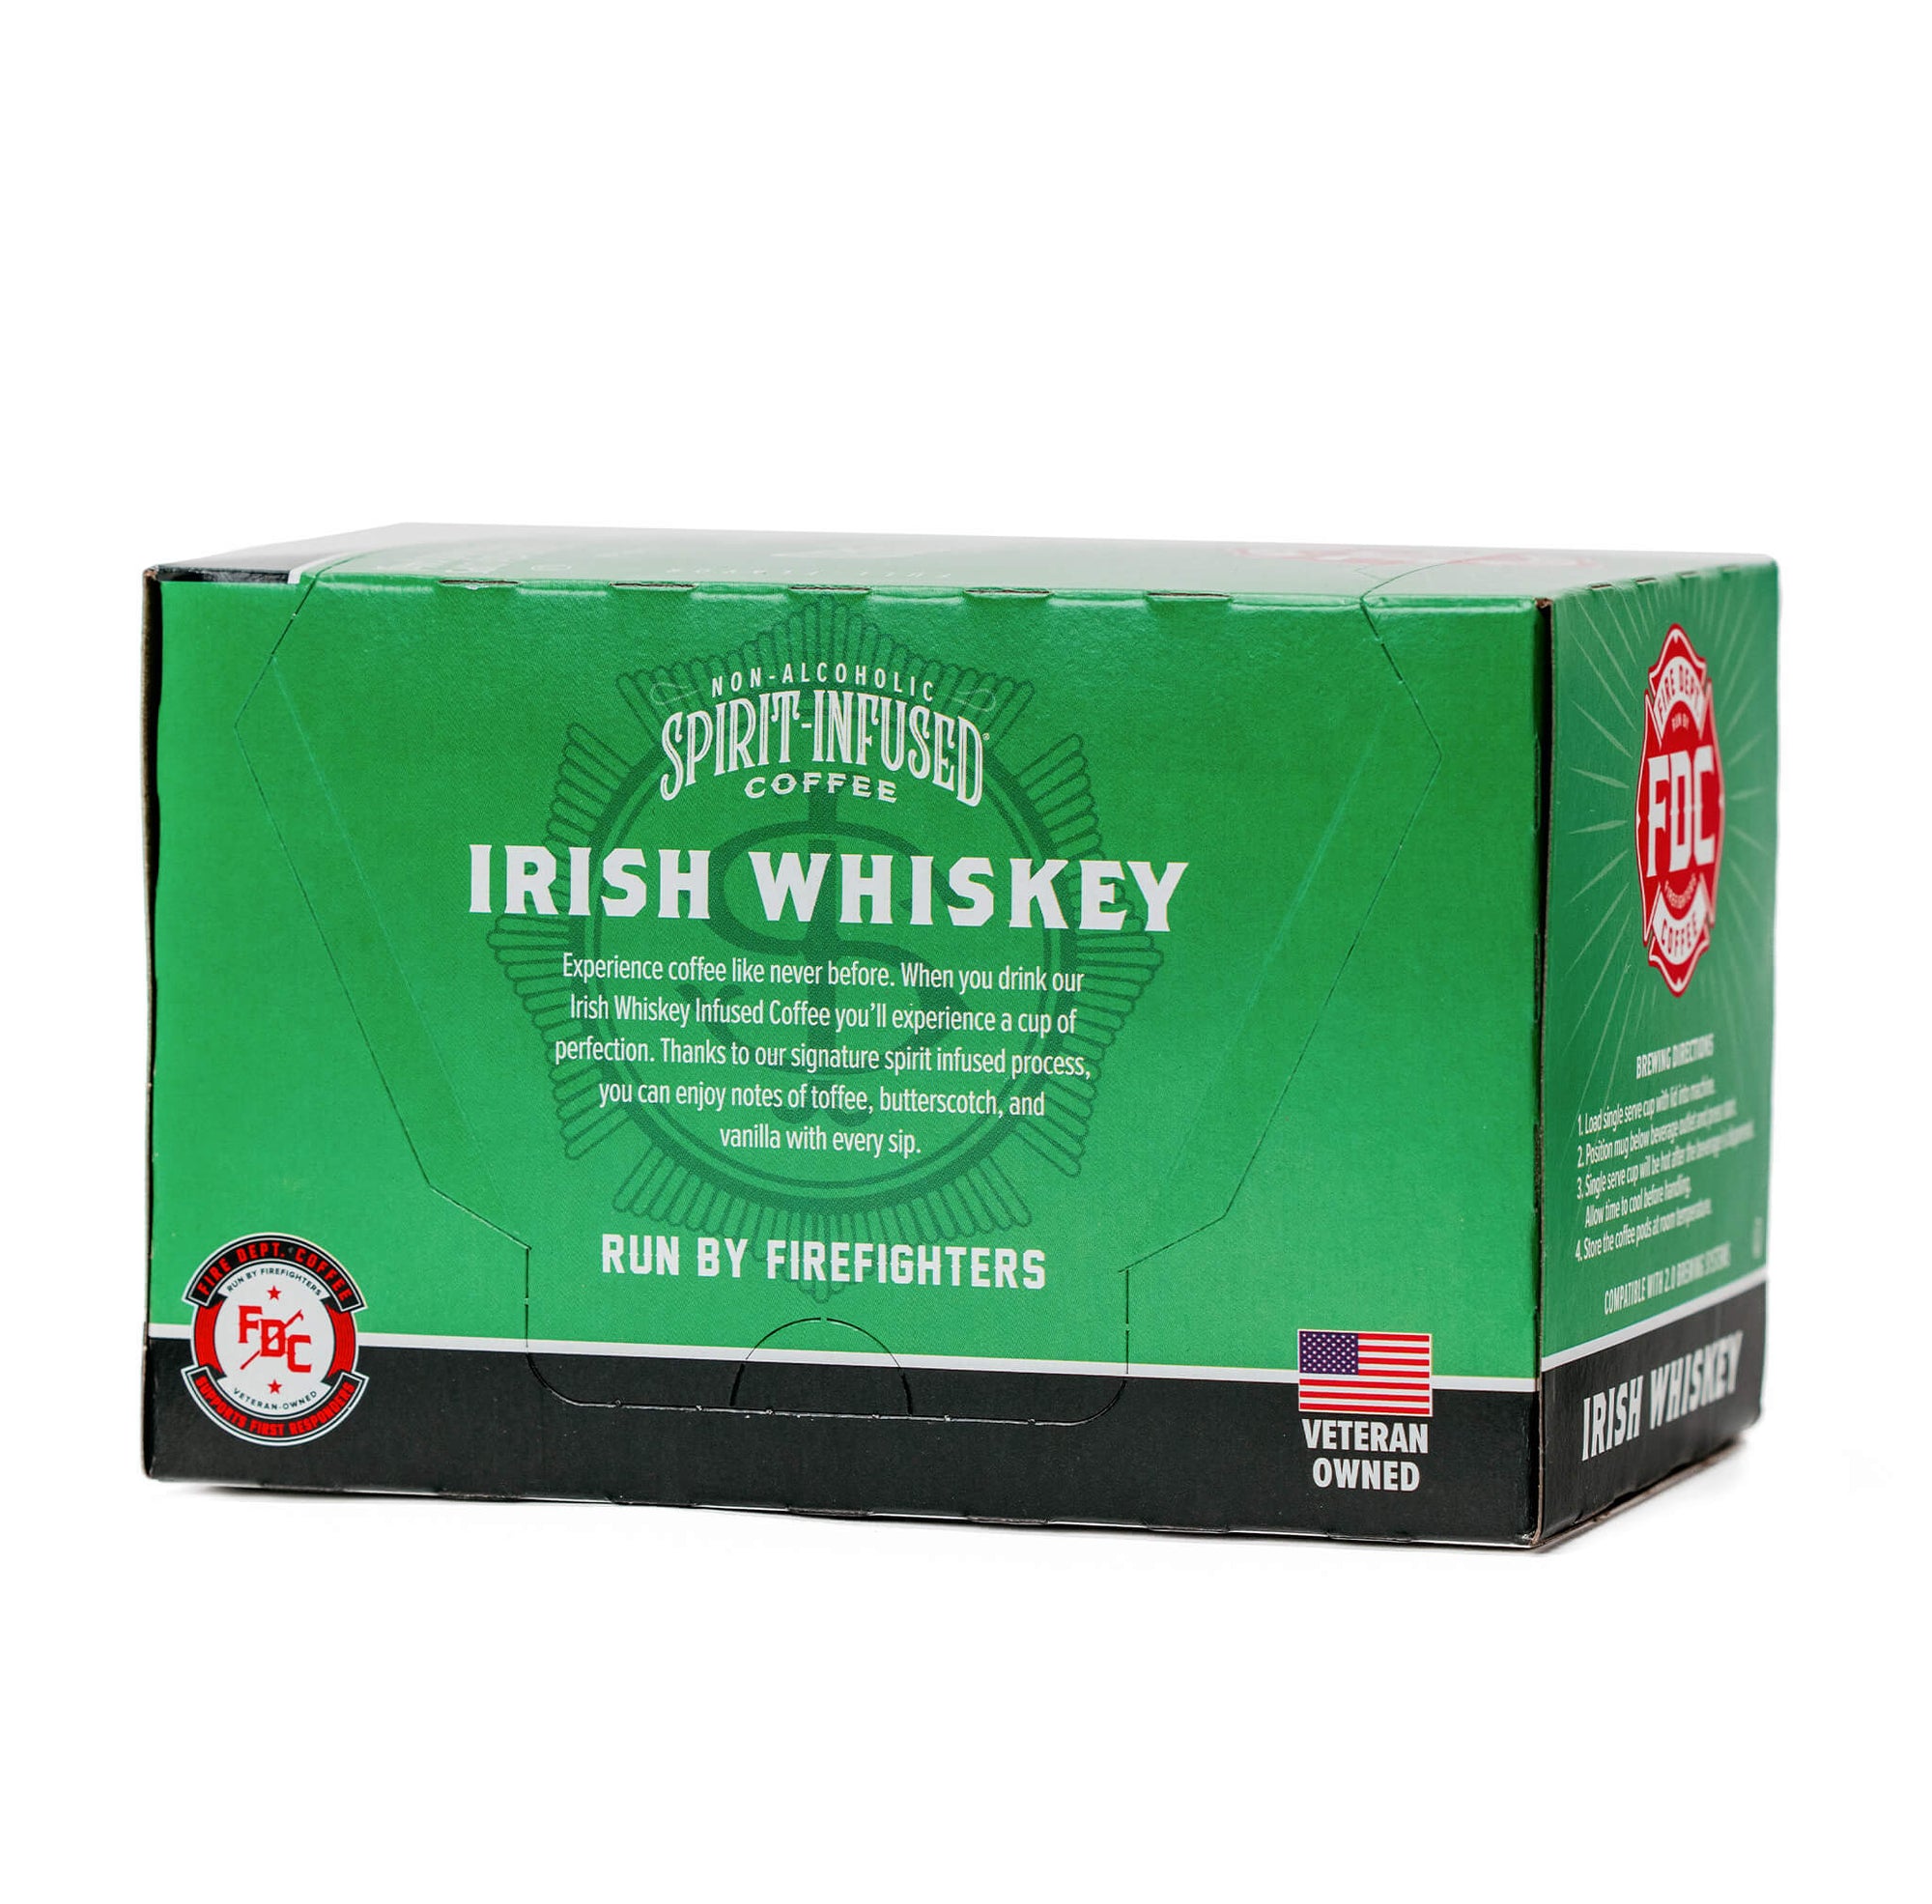 IRISH WHISKEY INFUSED COFFEE PODS, 12 BOXES (144 CUPS)